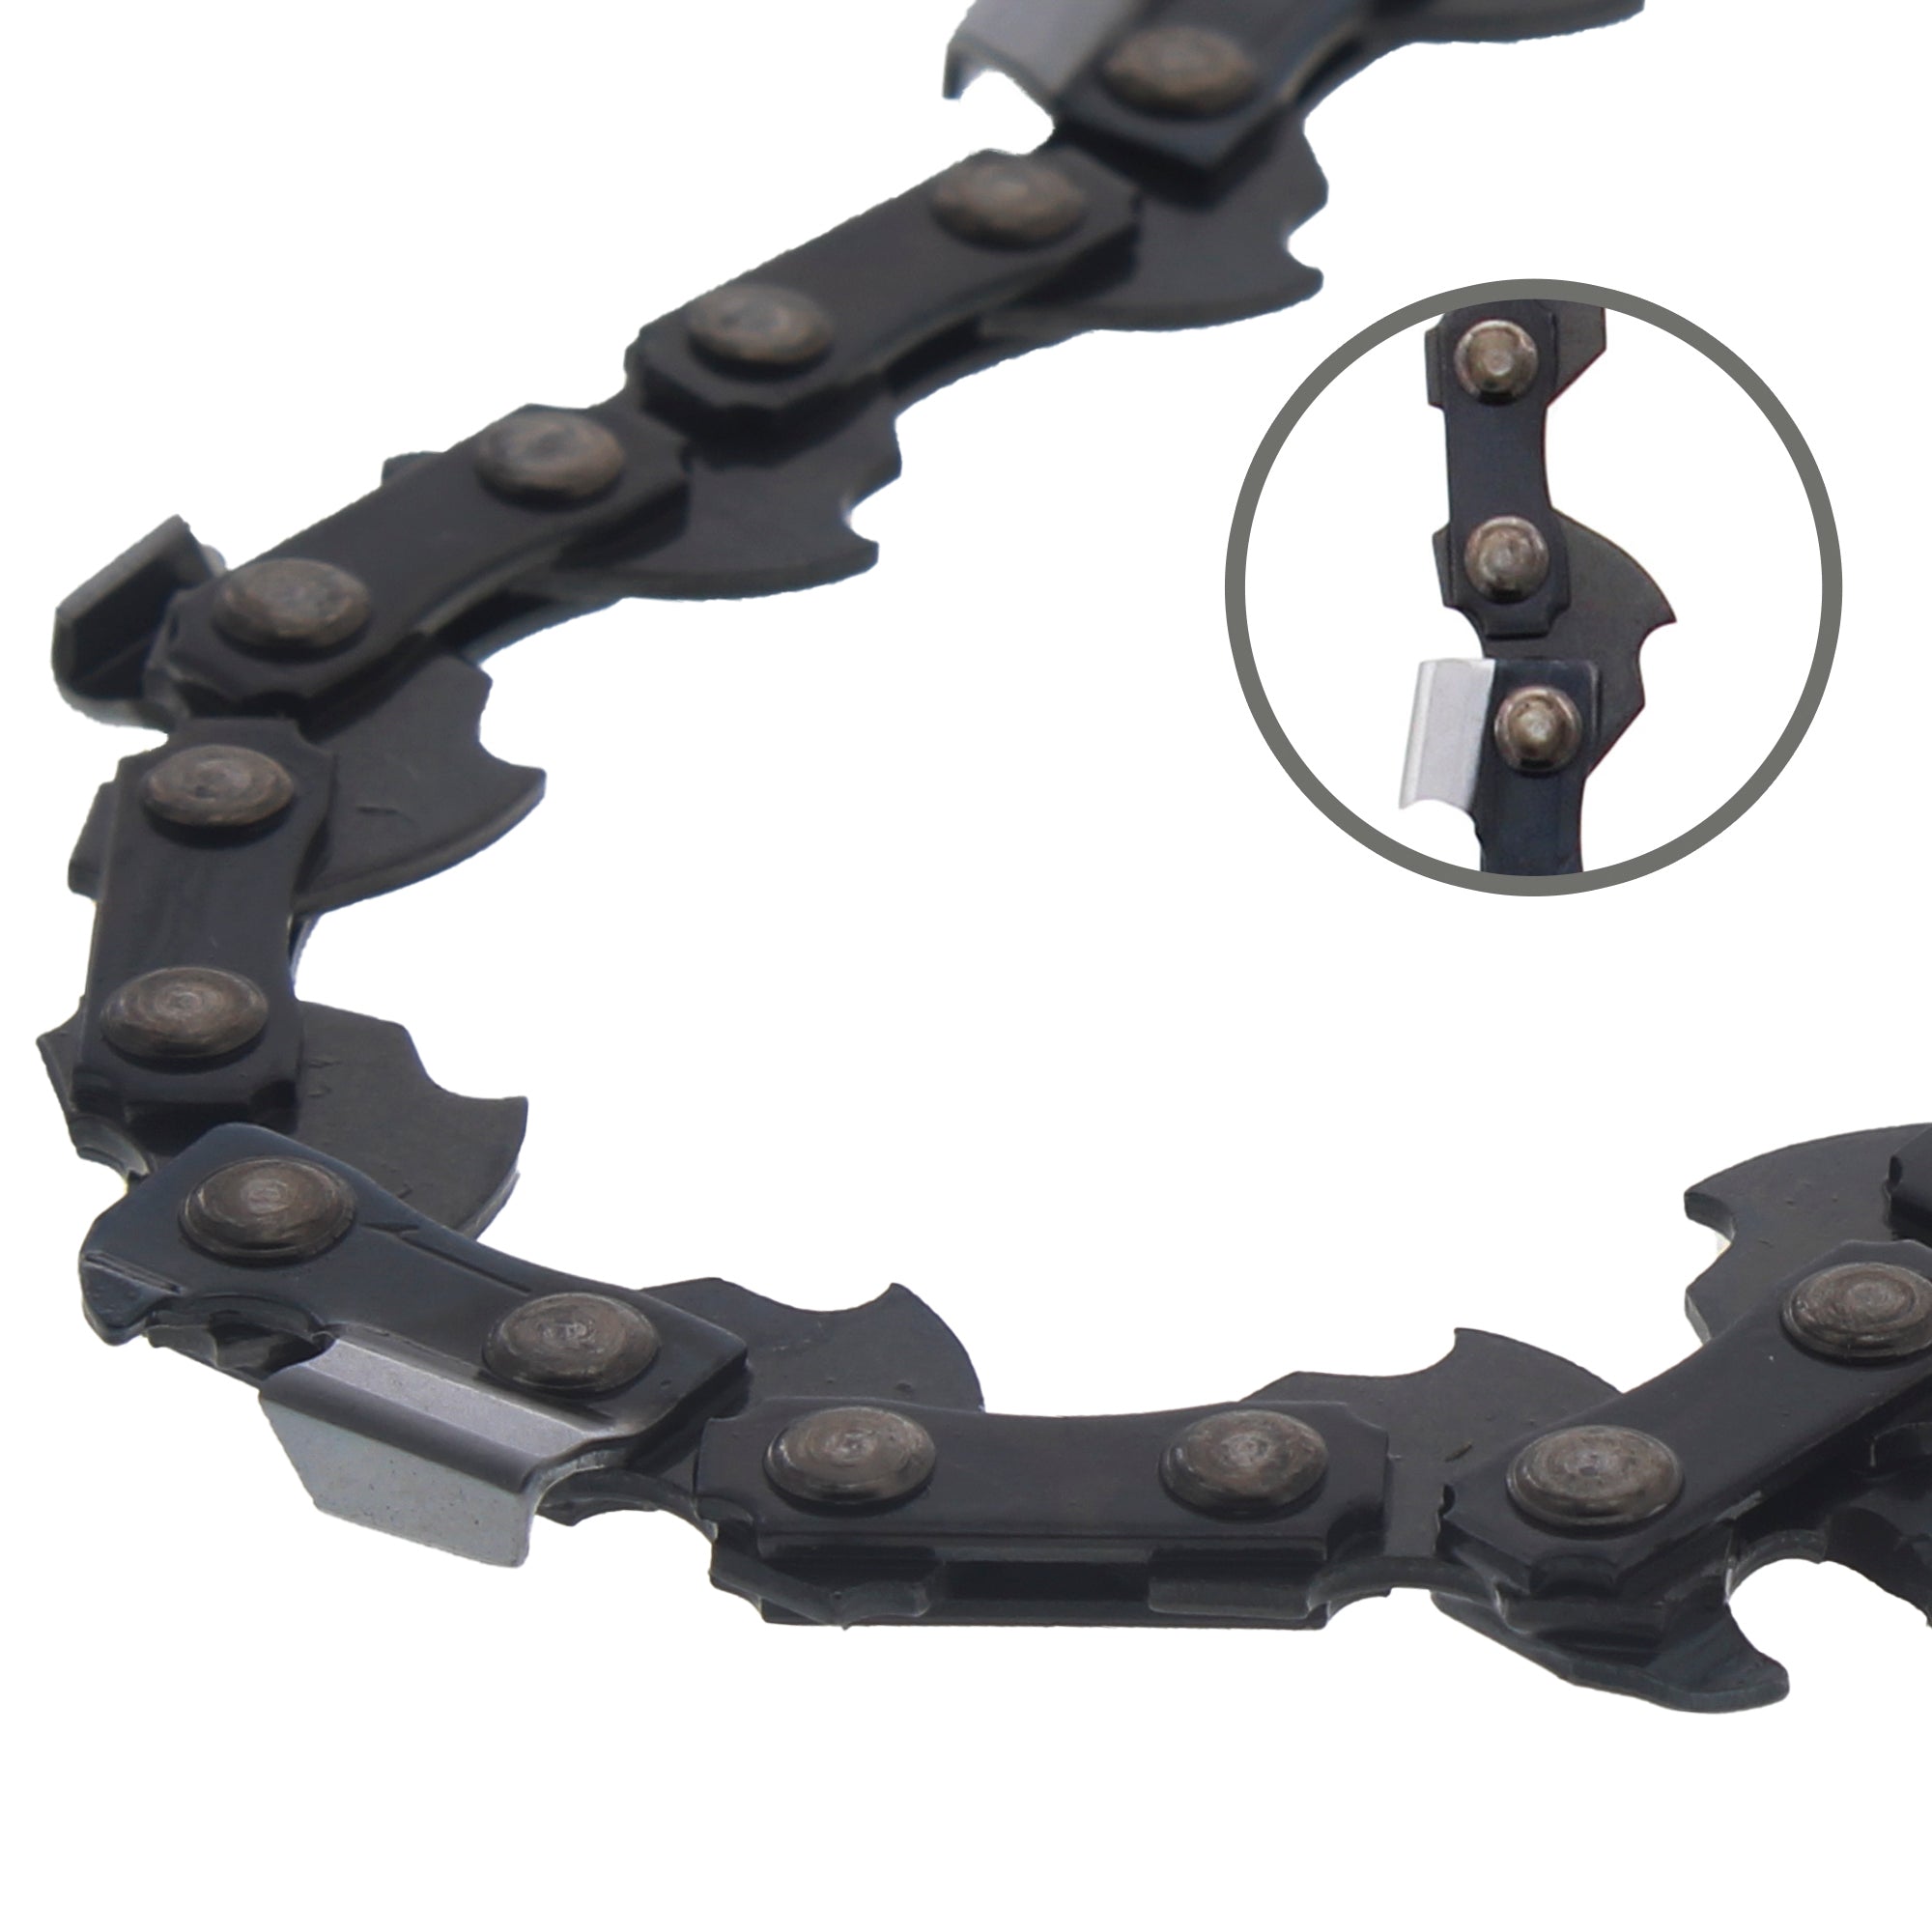 8TEN Chain 5-Pack 72EXJ091G 72EXL091G 33RS91E H4791